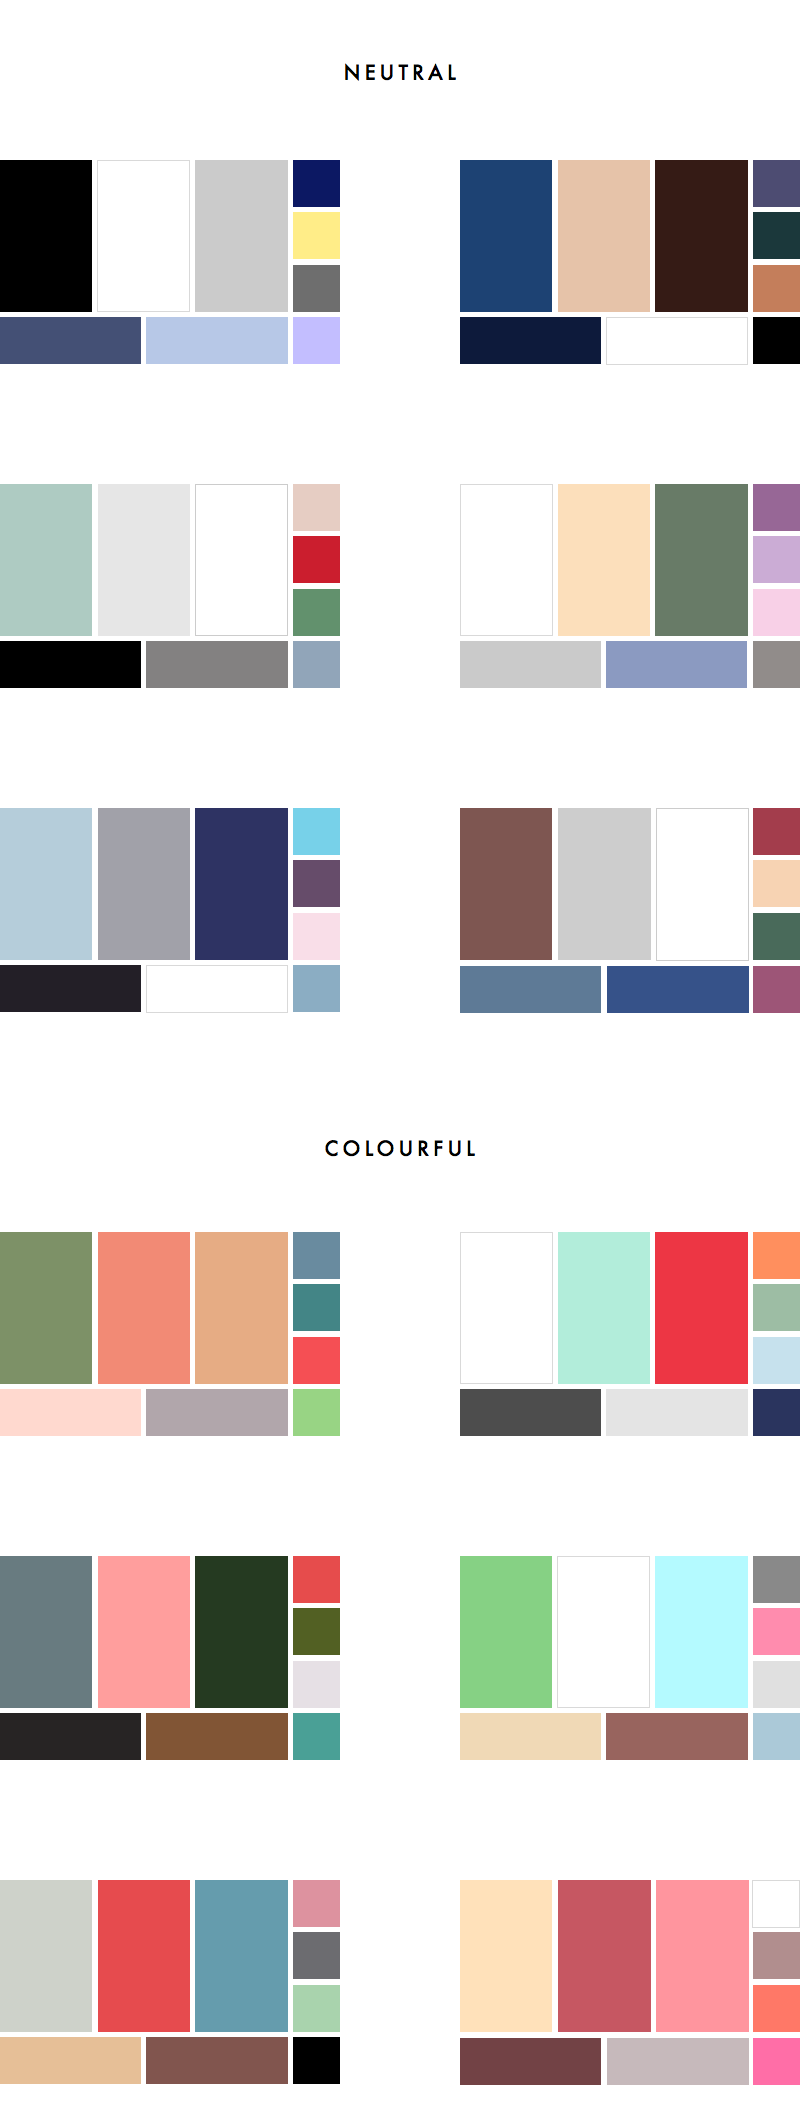 How To Choose A Colour Palette For Your Wardrobe 36 Sample Palettes Anuschka Rees,Cottage Style Country Living Room Furniture